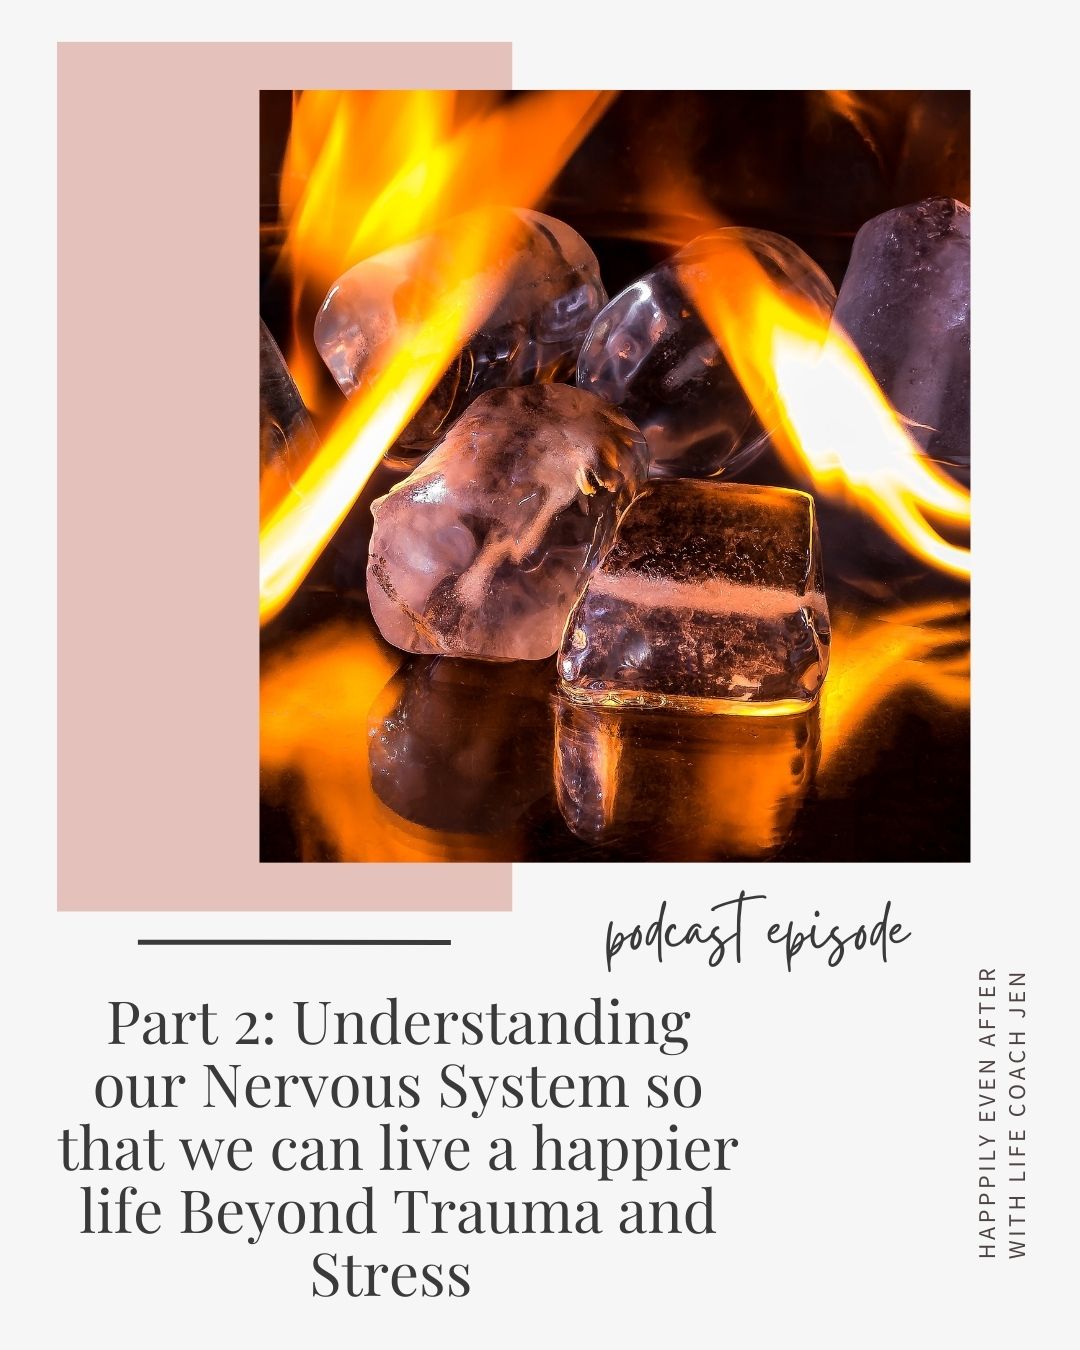 Promotional image for a podcast episode, featuring flames enveloping ice cubes, with text about understanding the nervous system for a happier life.